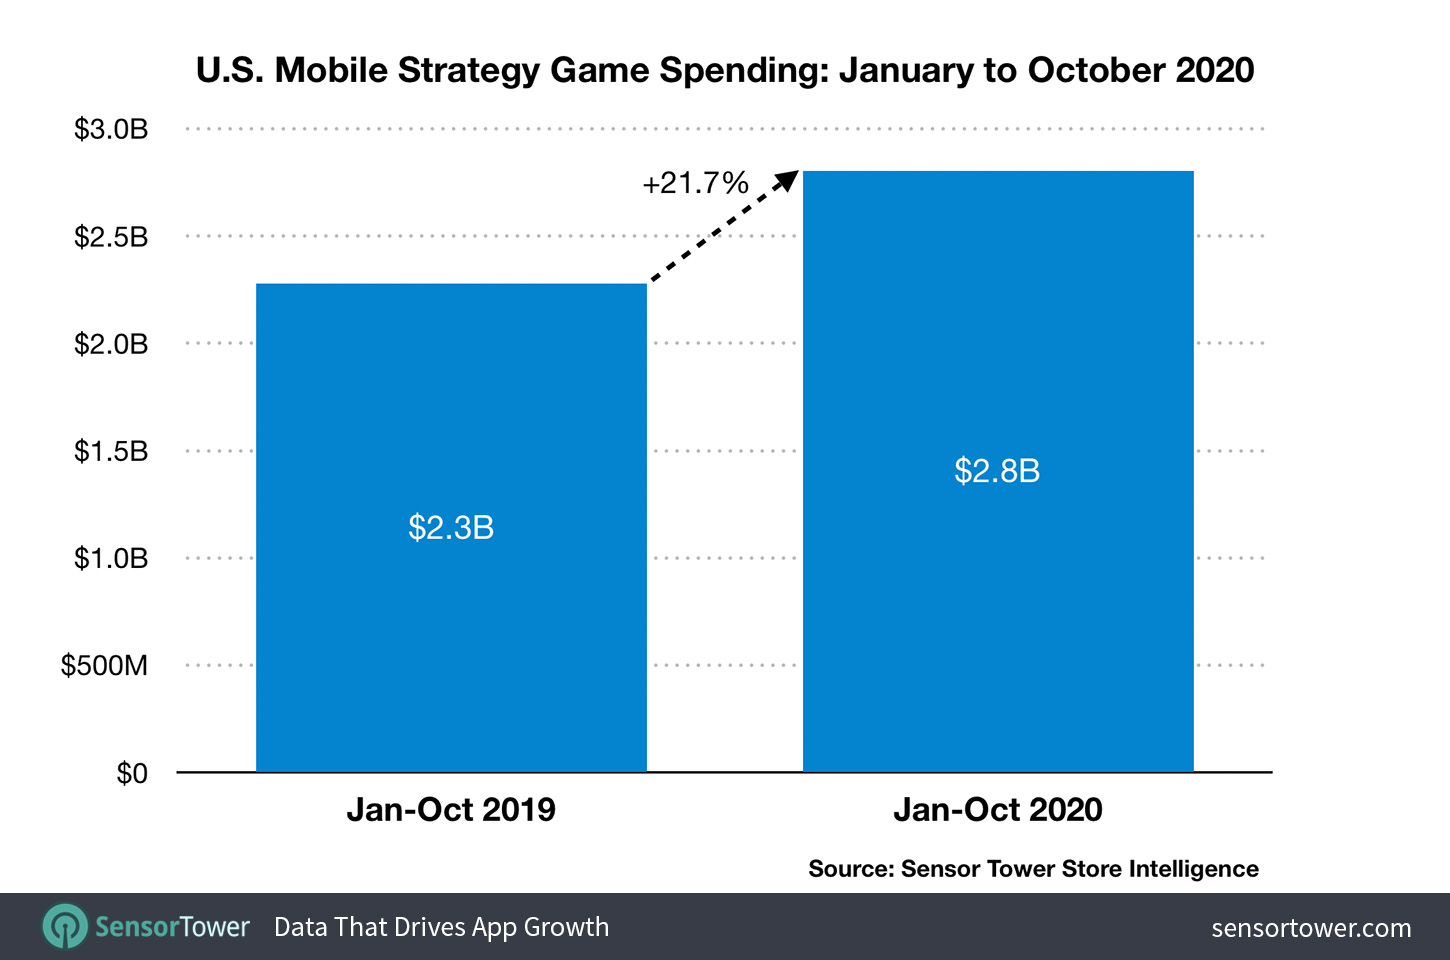 U.S. Mobile Strategy Game Spending Downloads: January to October 2020